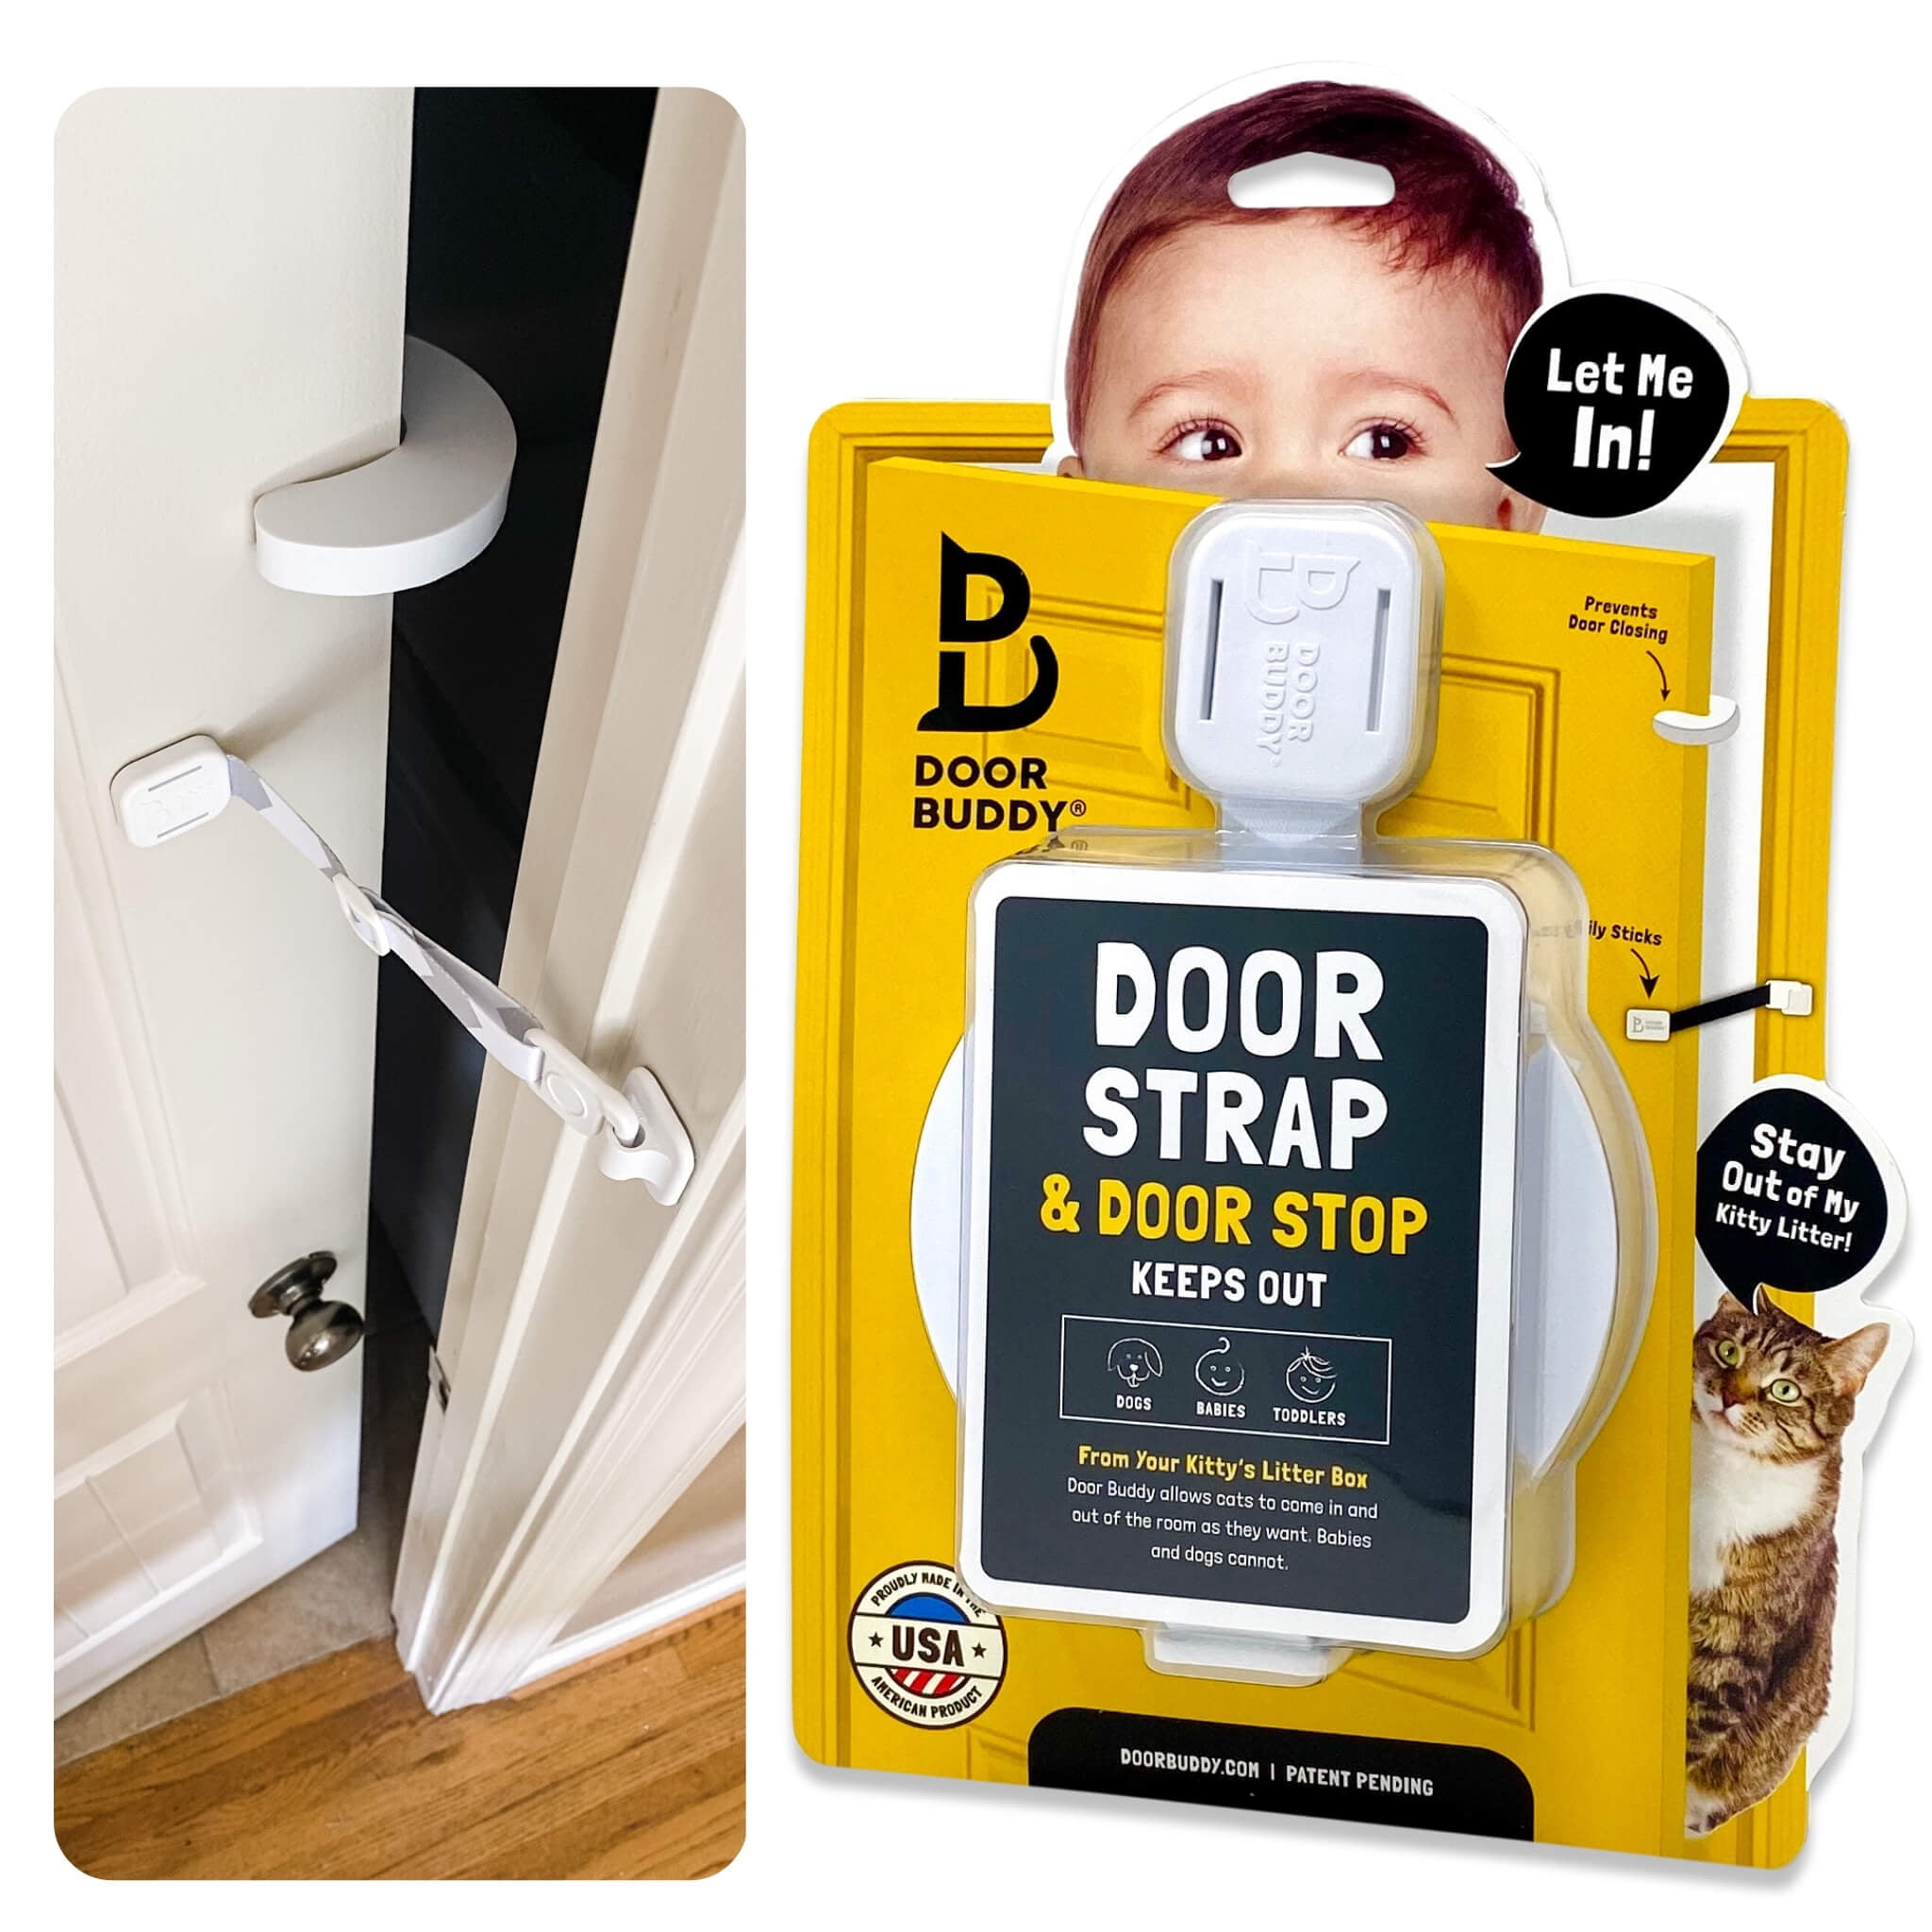 Rubber door stop stoppers safety prevent finger injuries lock protection childAB 